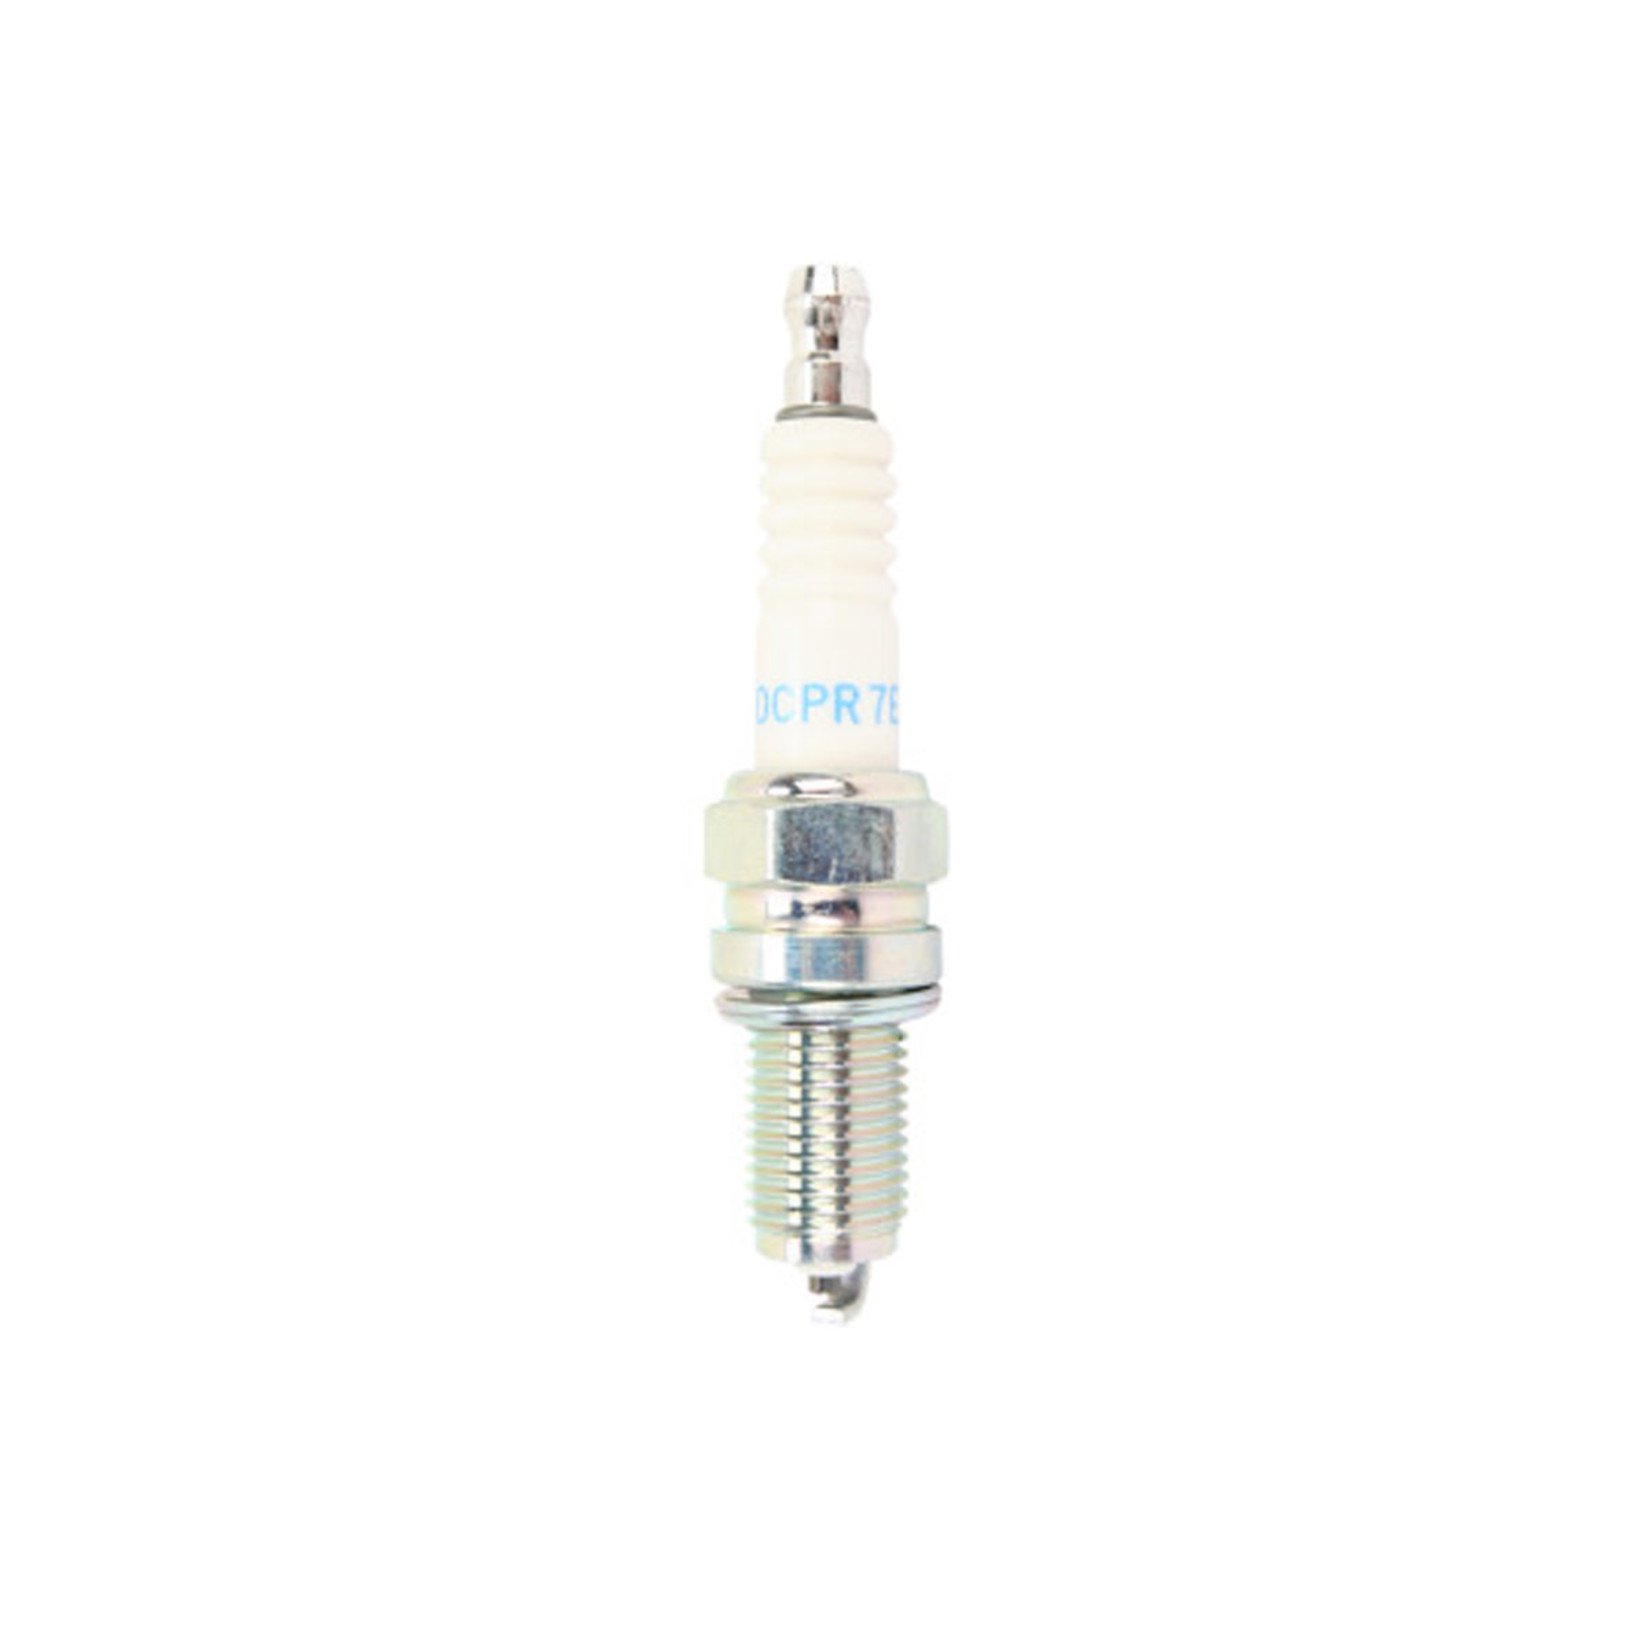 NGK SPARK PLUGS NGK SPARK PLUGS  DCPR7E 3932